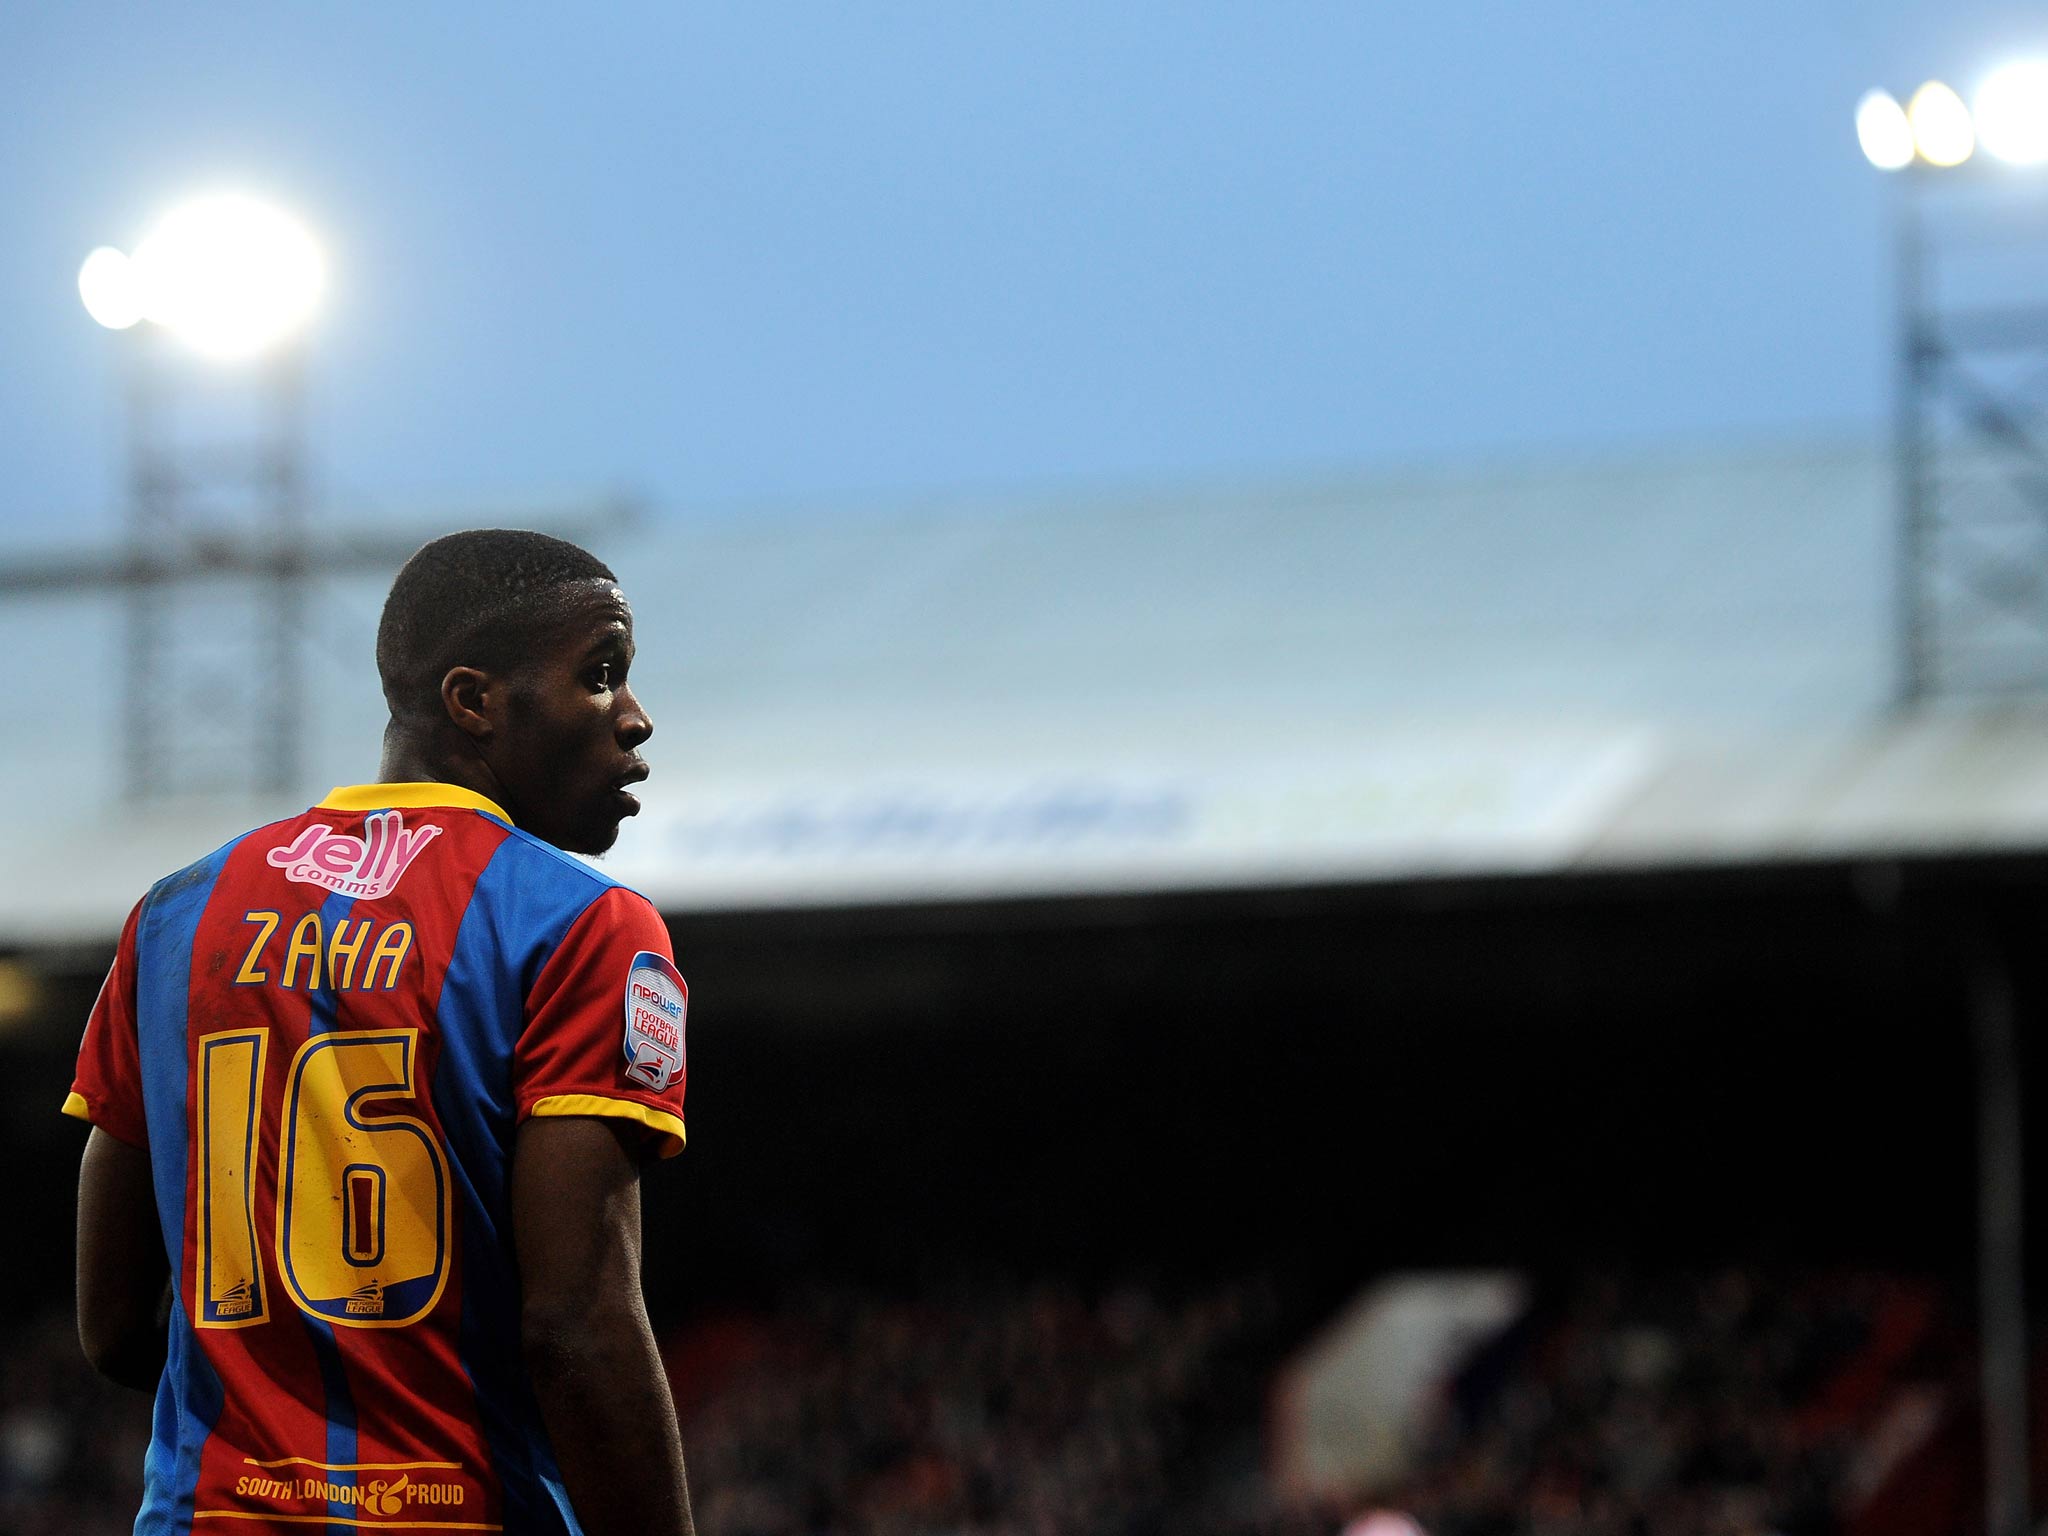 Wilfried Zaha will have a chance to impress at a Premier League ground